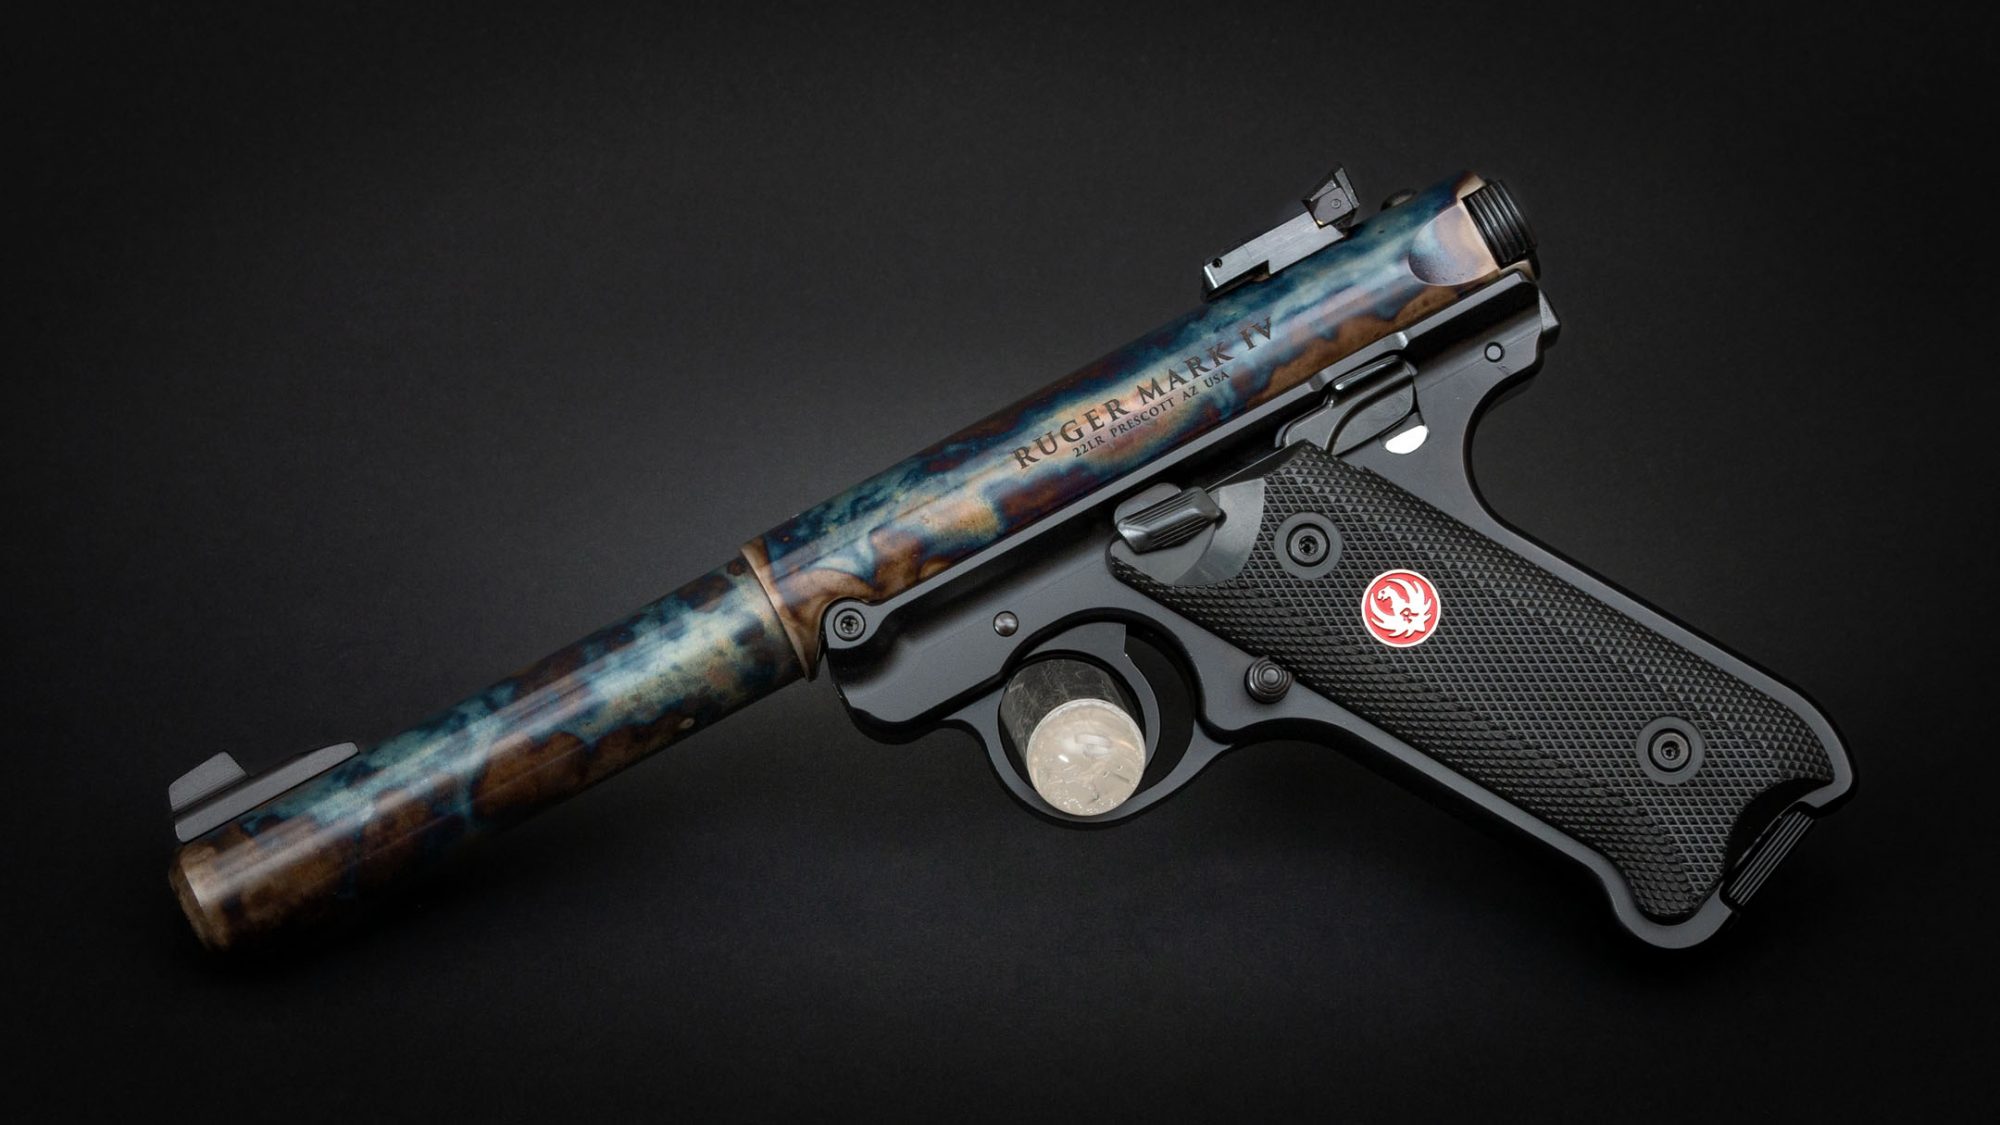 Photo of a color case hardened Ruger Mark IV Target pistol, featuring bone charcoal color case hardening by Turnbull Restoration Co. of Bloomfield, NY